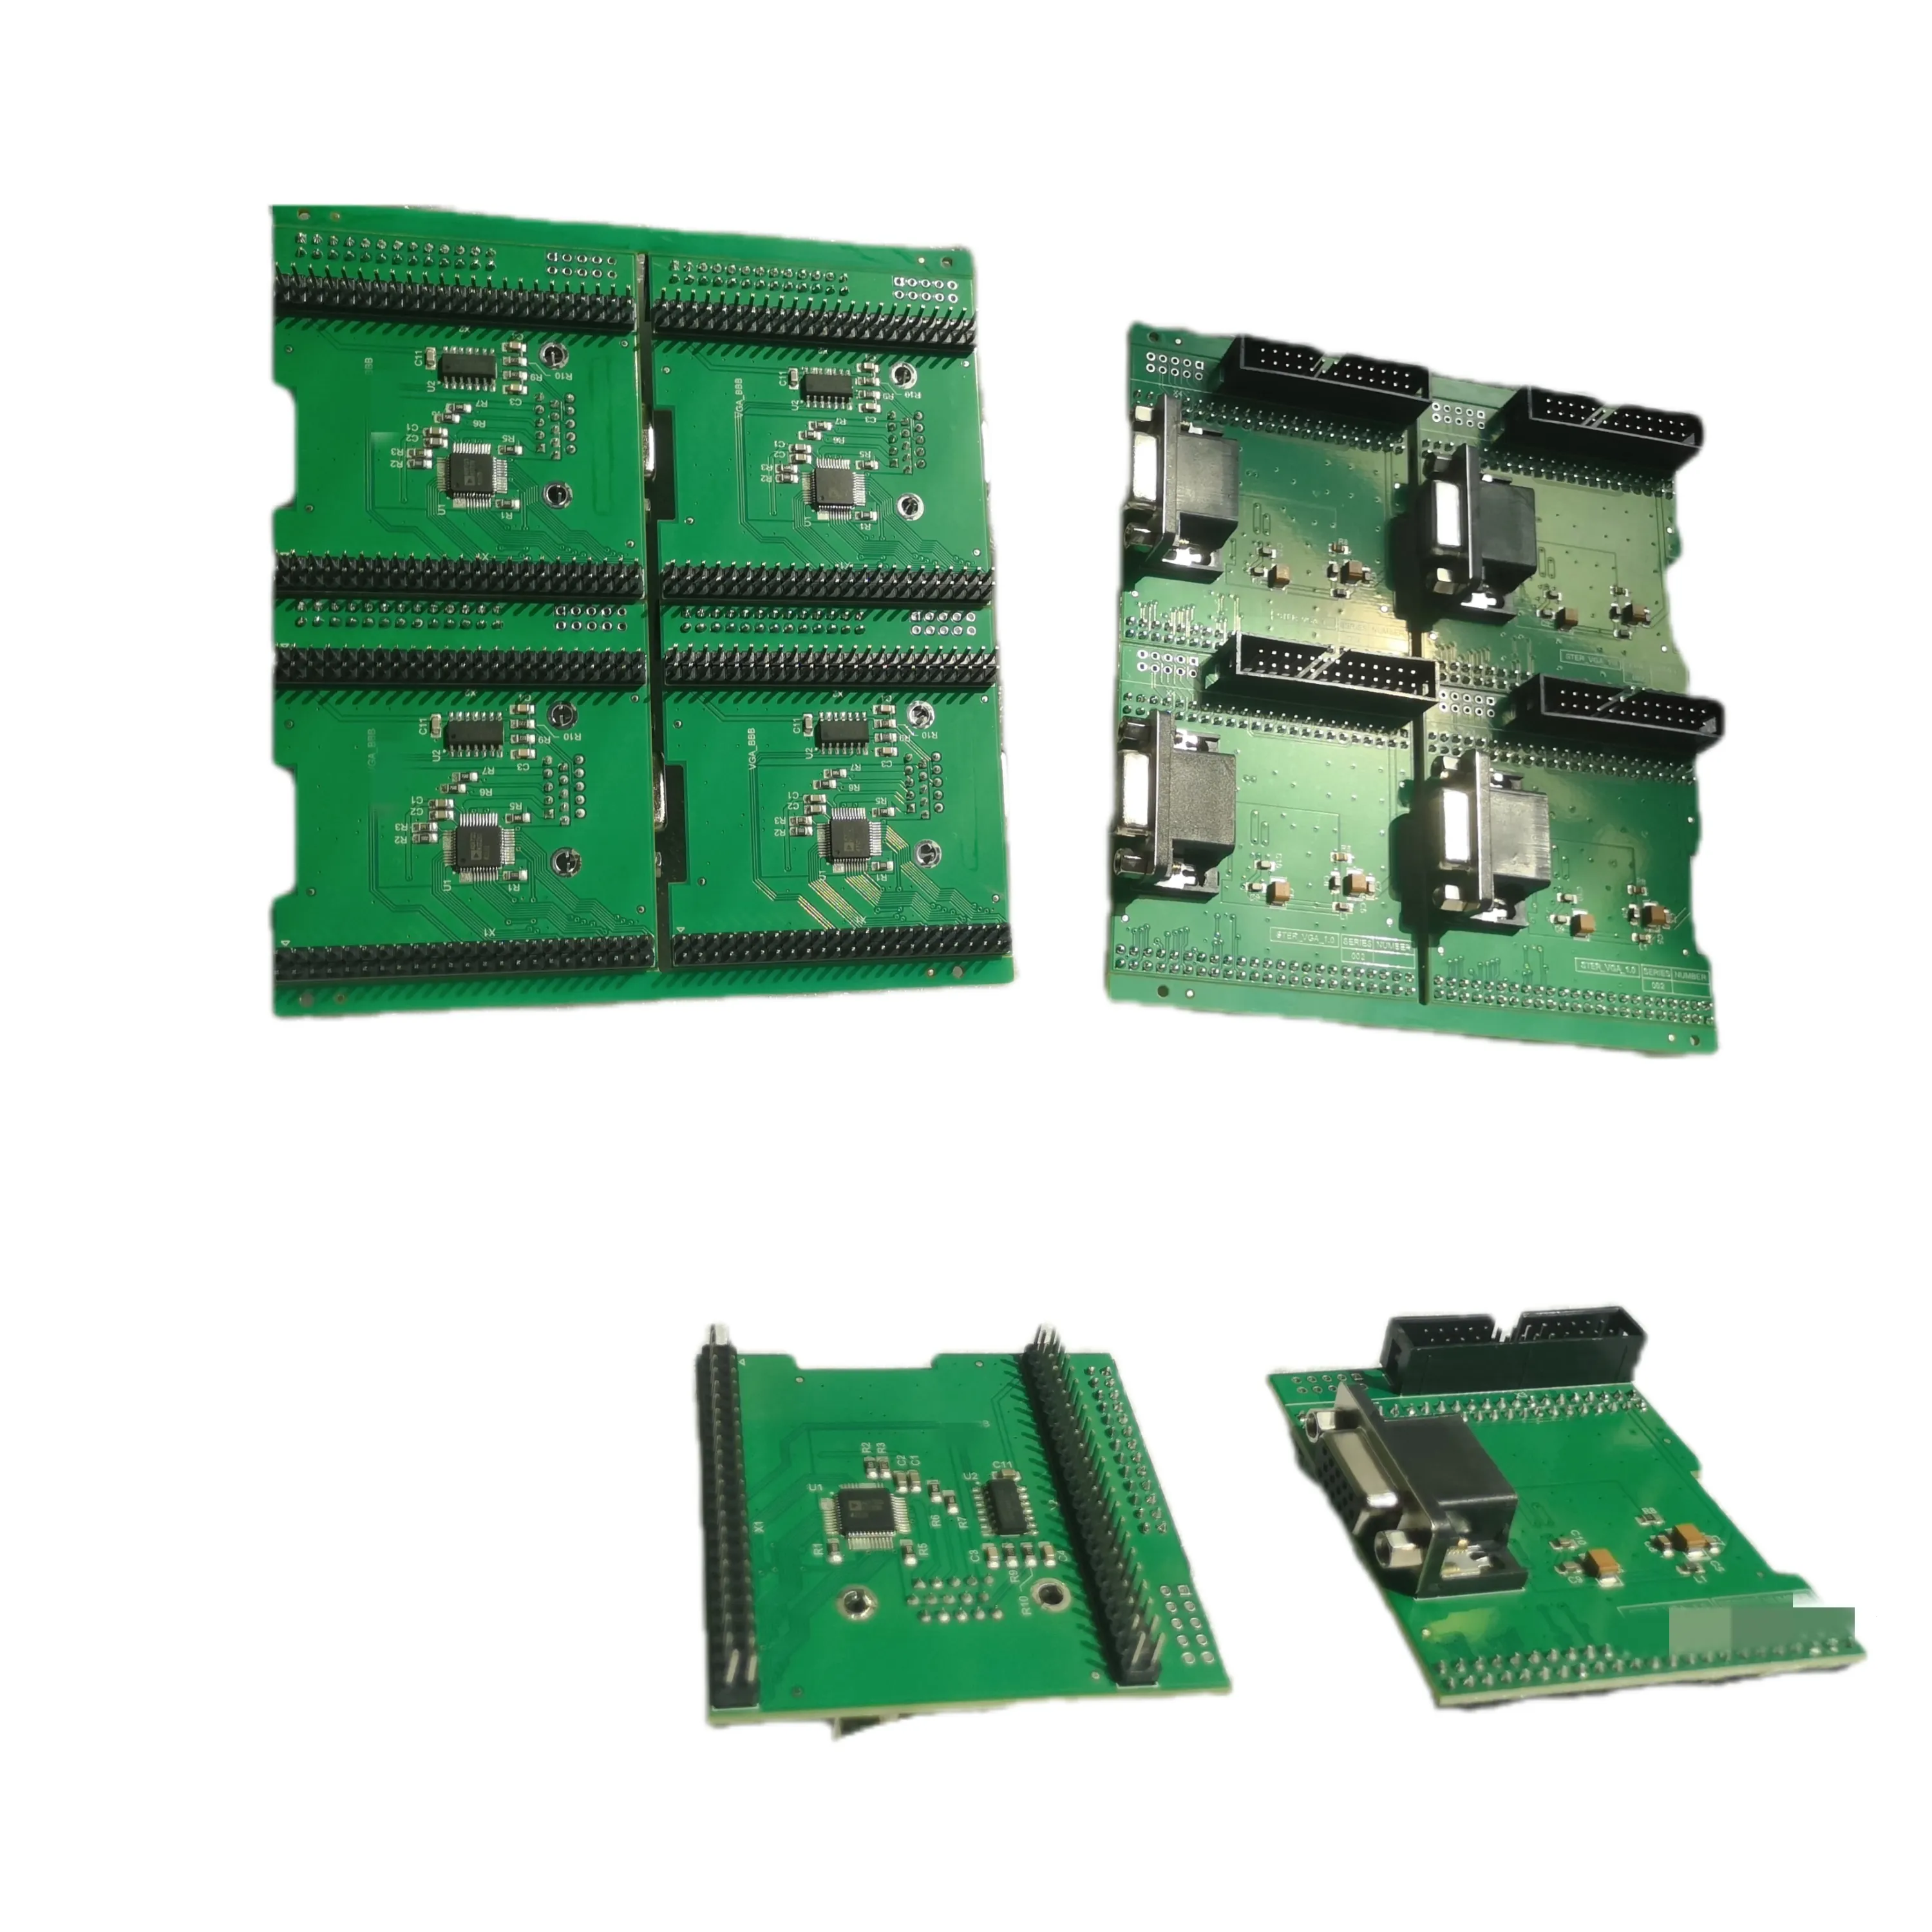 double layer green soldermask pcb communication module electronics design to final assembly customized one-stop pcba service